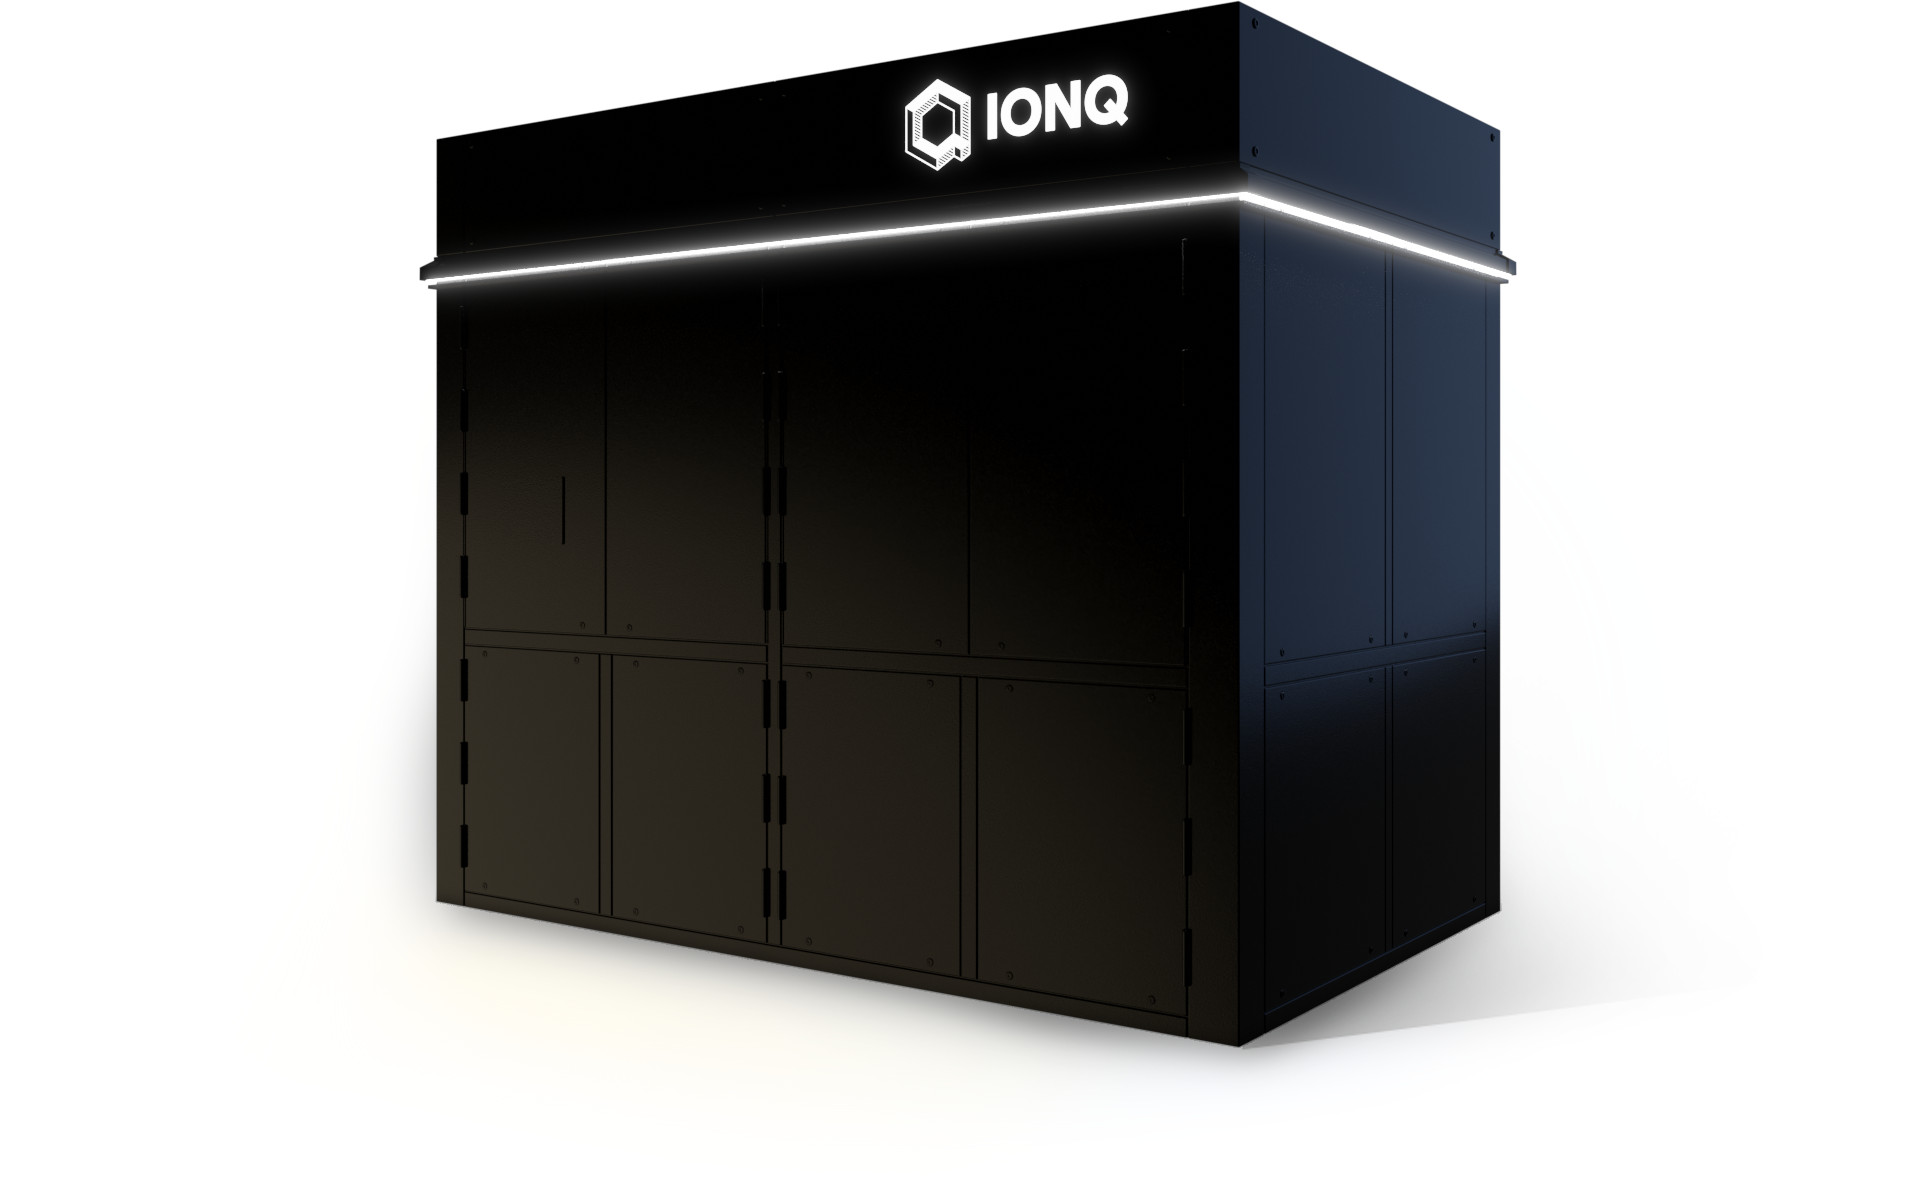 Ionq Started Research Credits Program To Kick Start The Race For Quantum Platform Territory